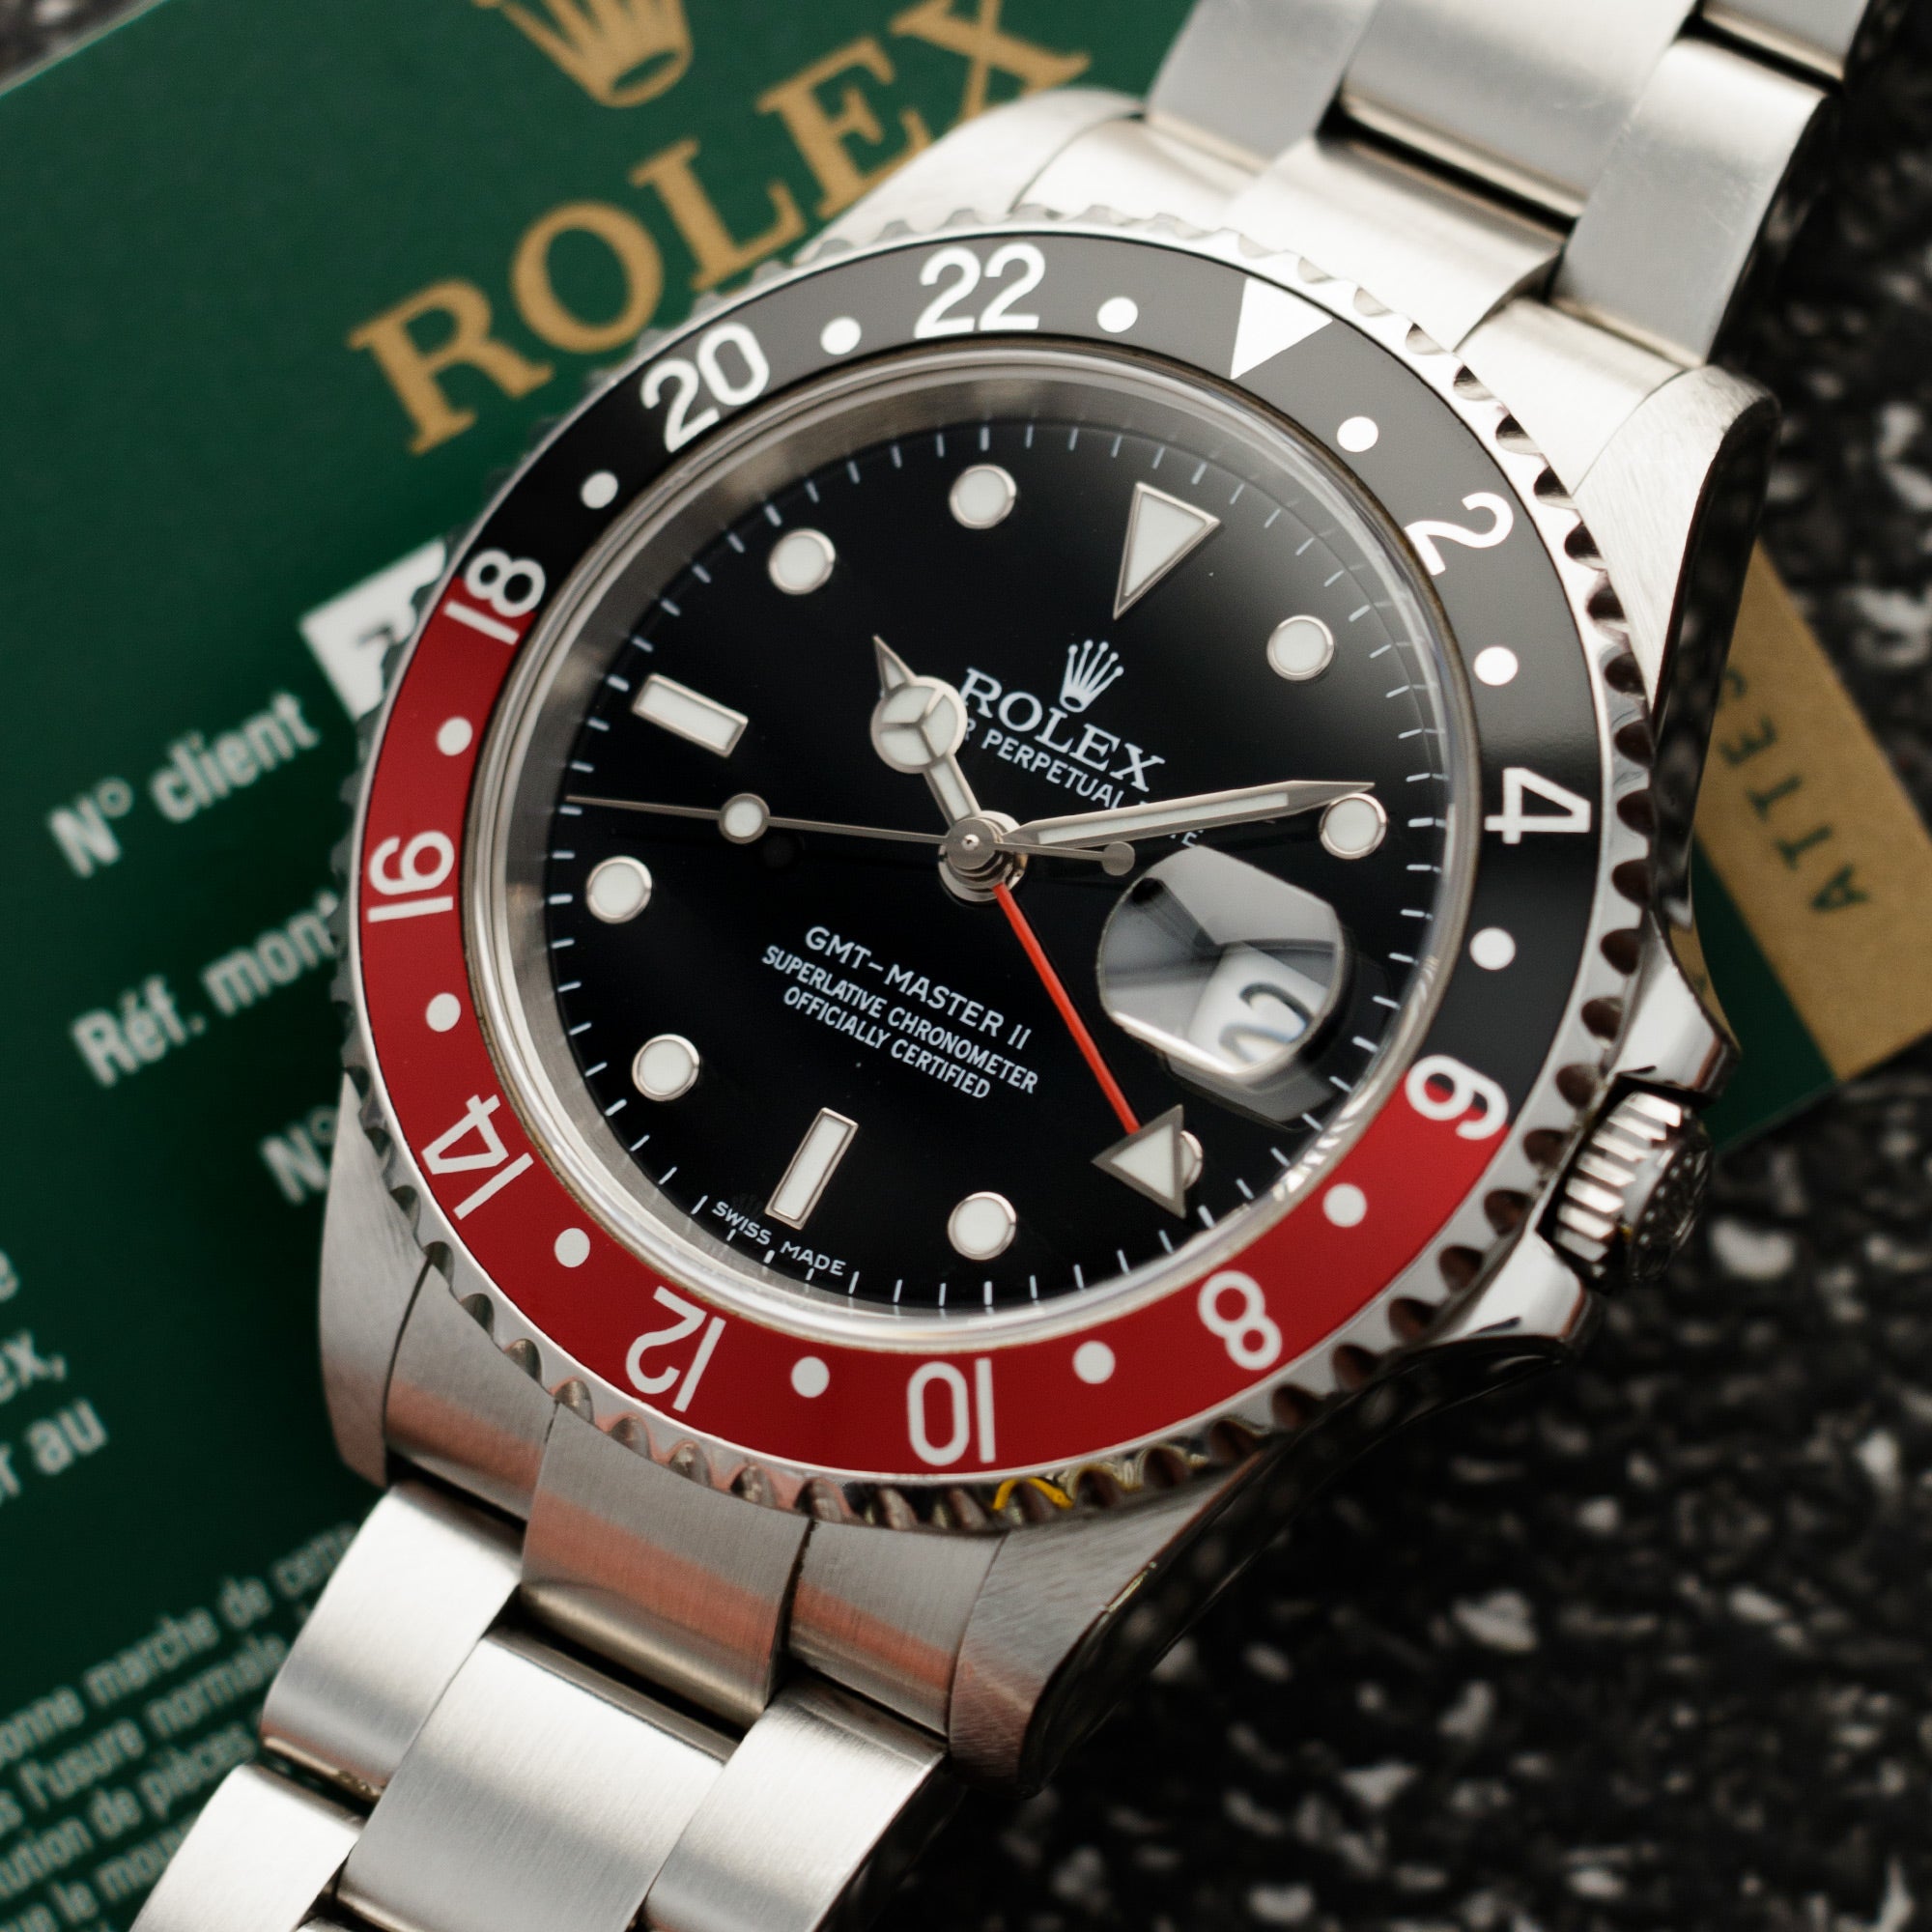 Rolex - Rolex Steel M-Series Coke GMT-Master Ref. 16710 with Error Dial - The Keystone Watches